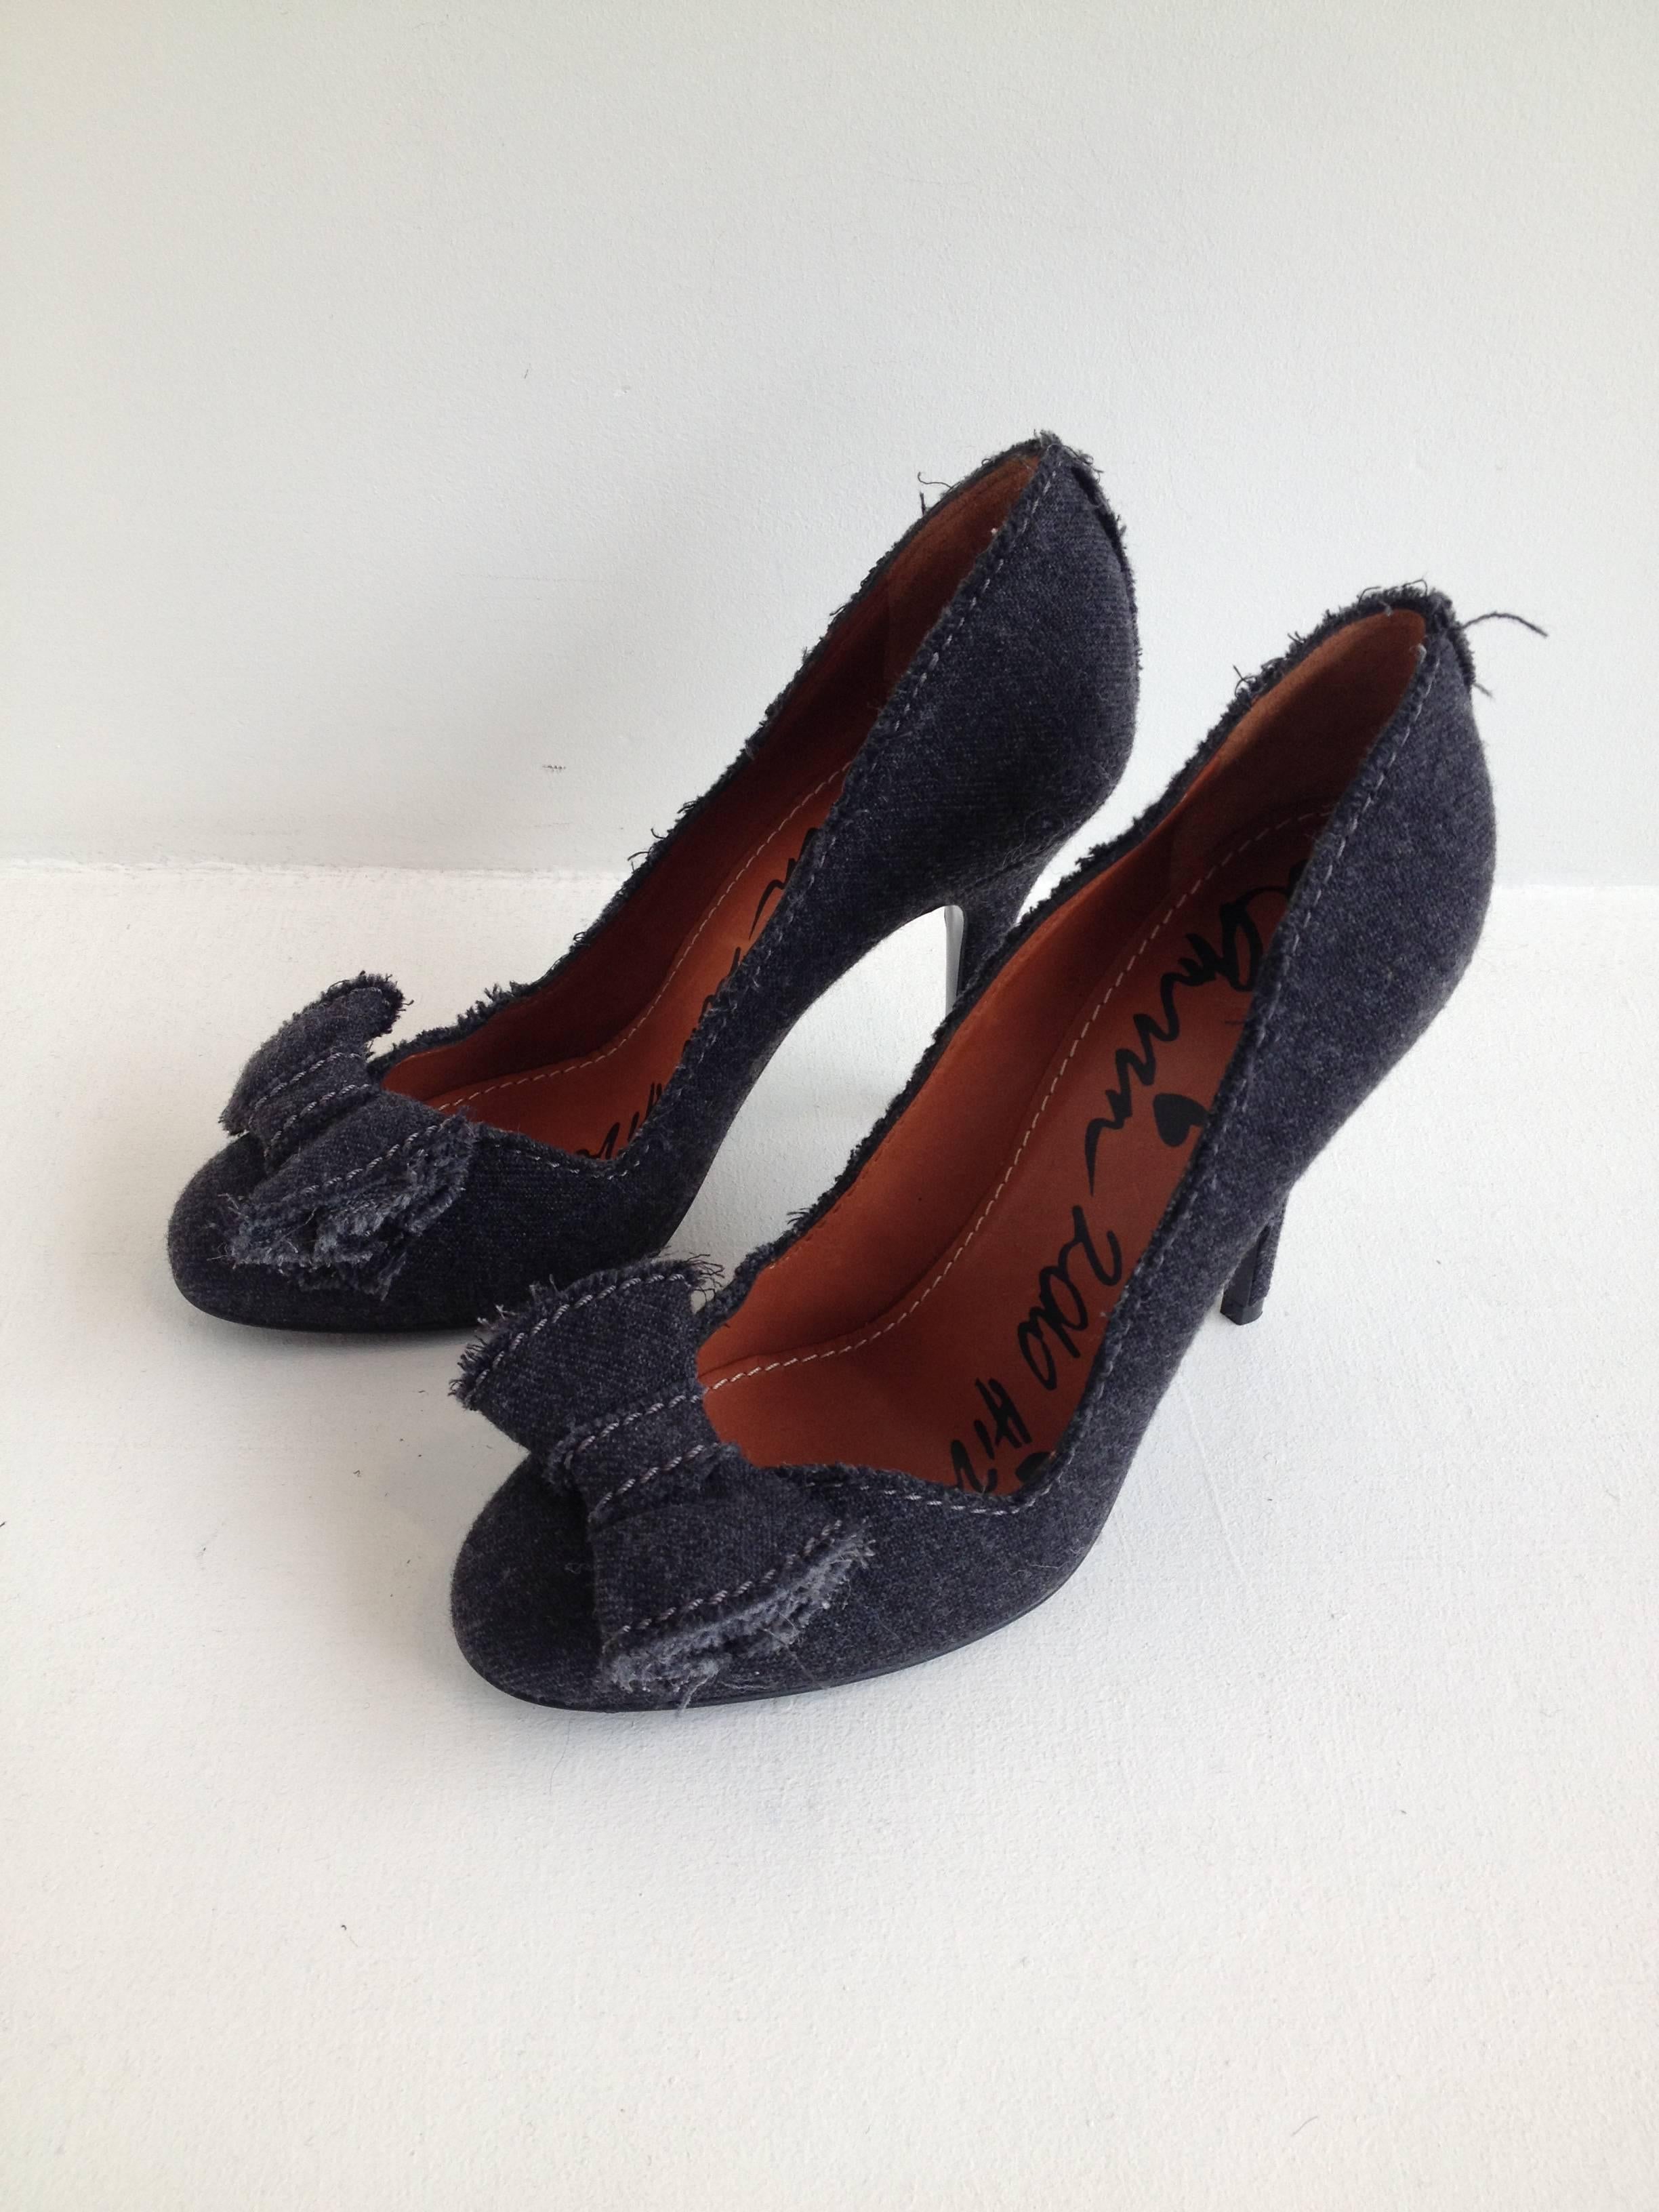 Black Lanvin Grey Fabric Pumps with Bows